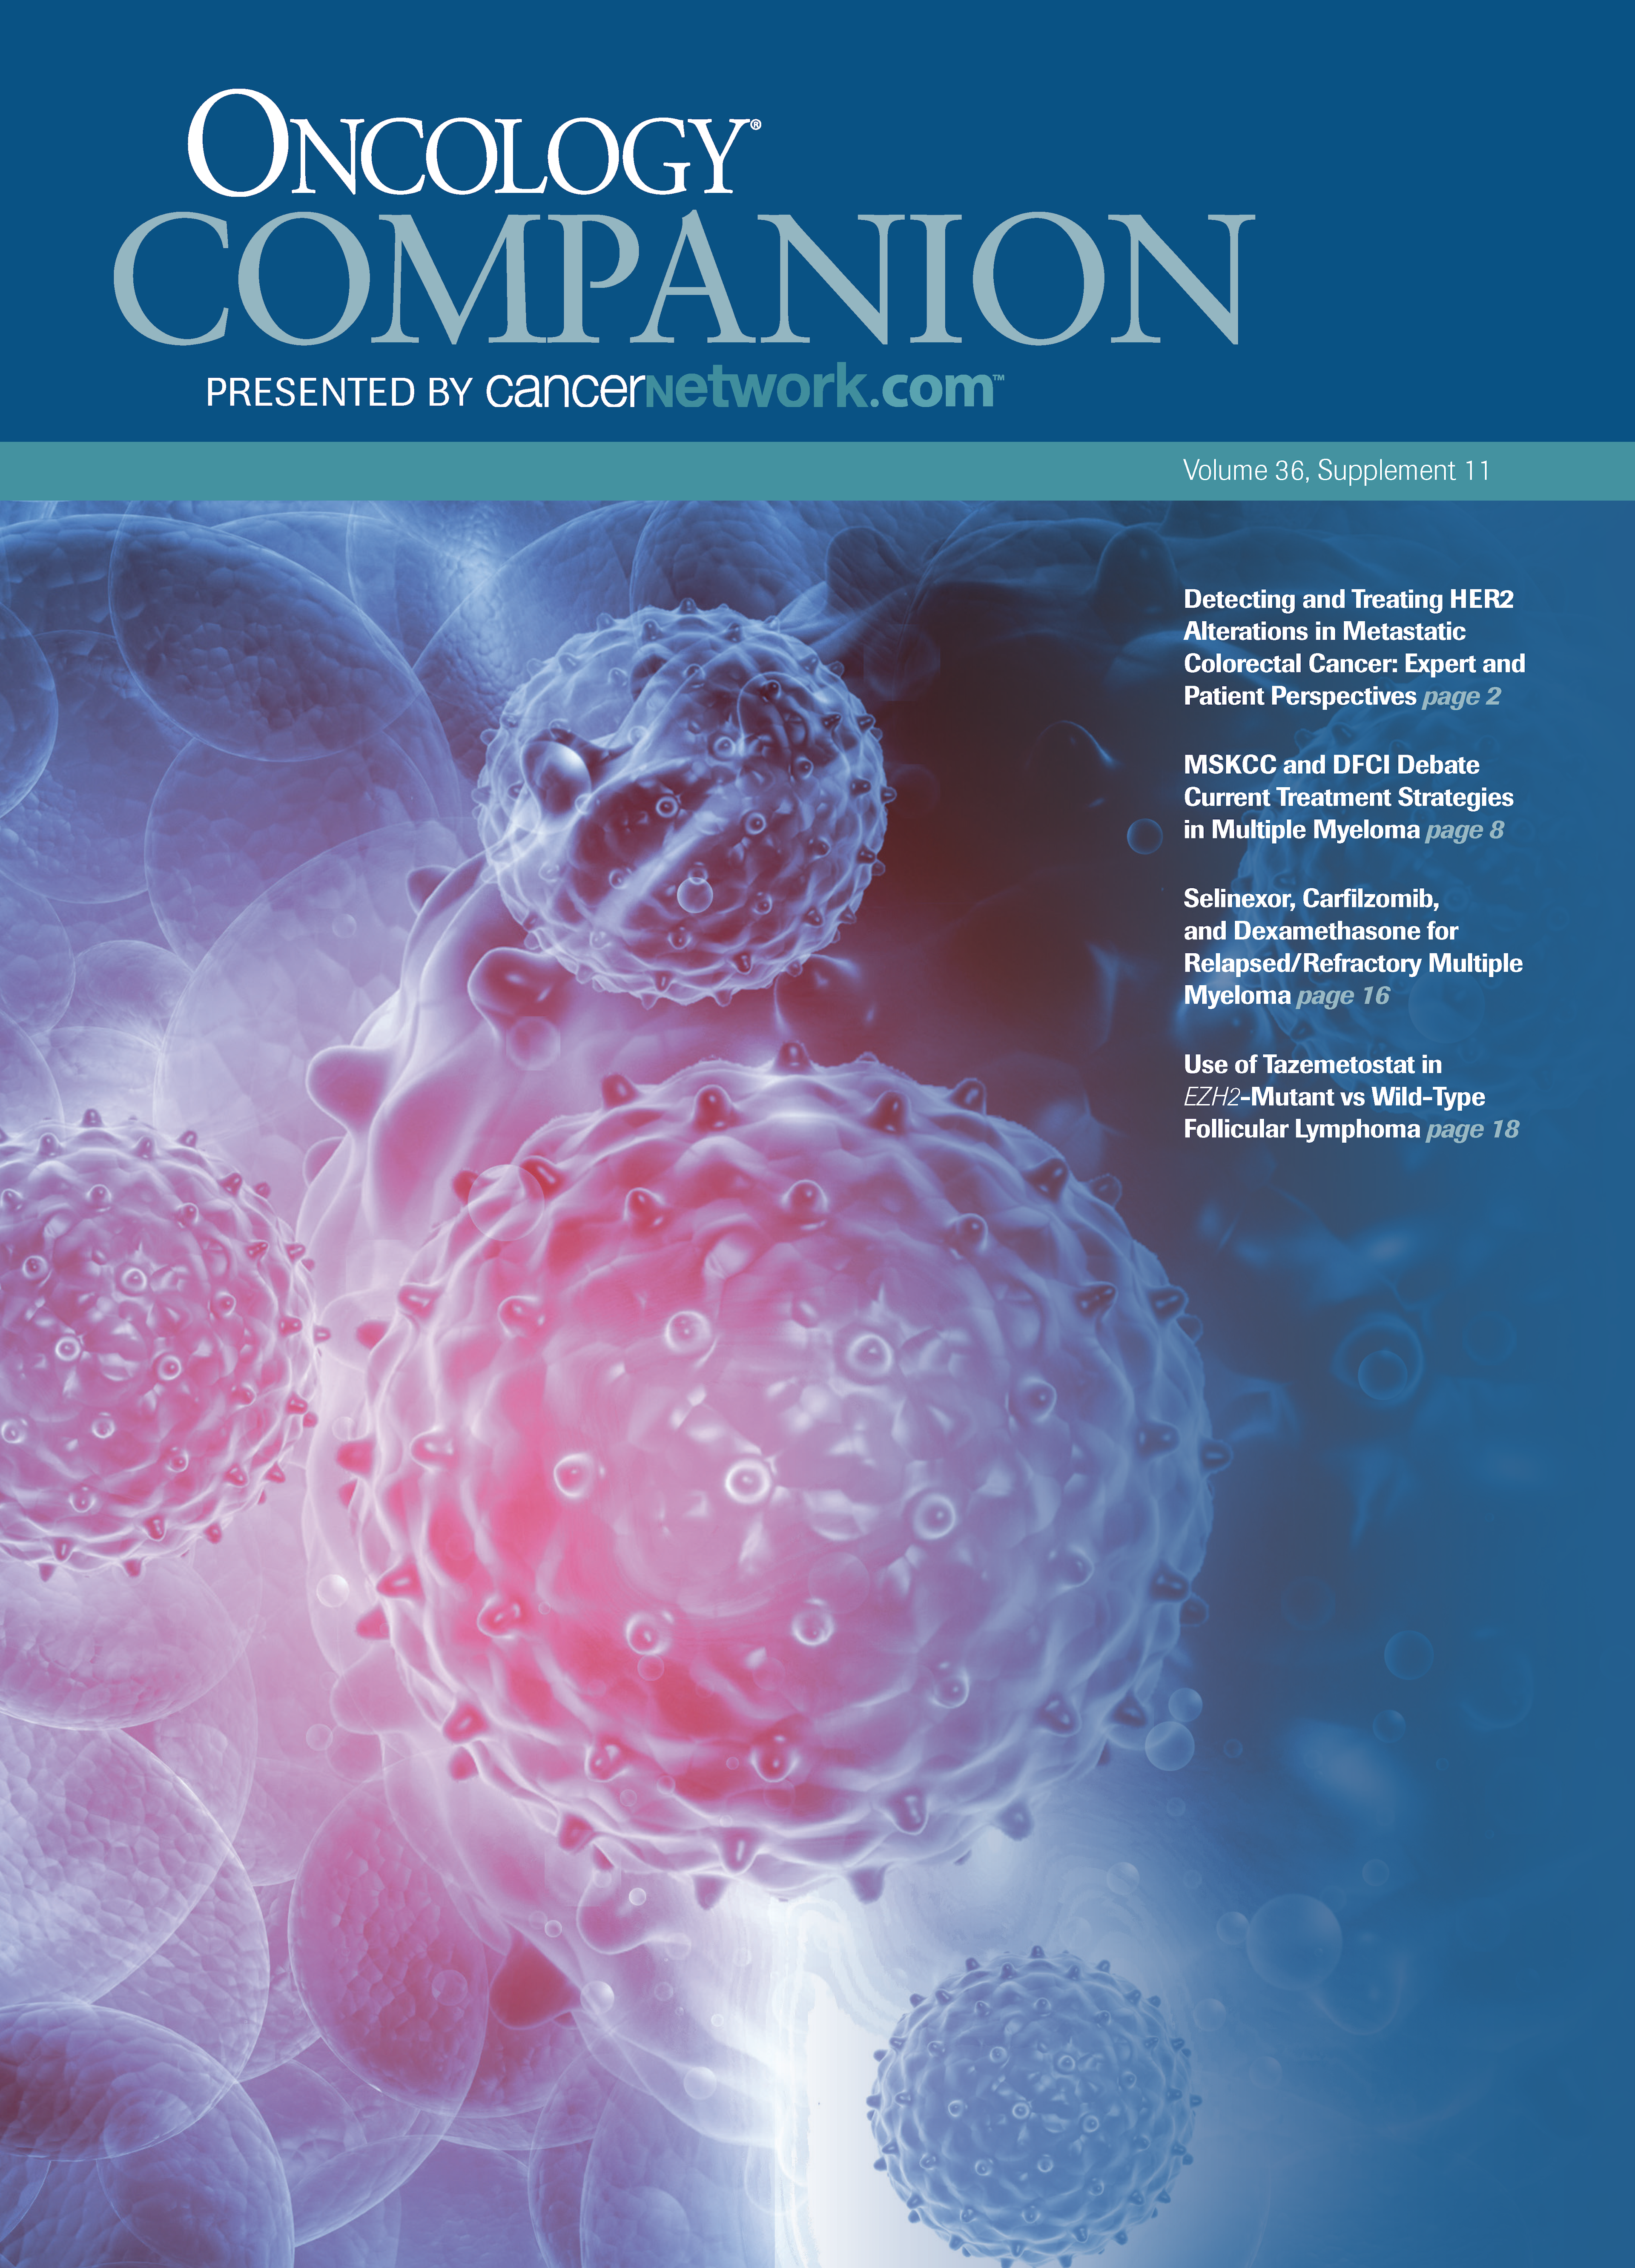 ONCOLOGY® Companion, Volume 36, Supplement 11